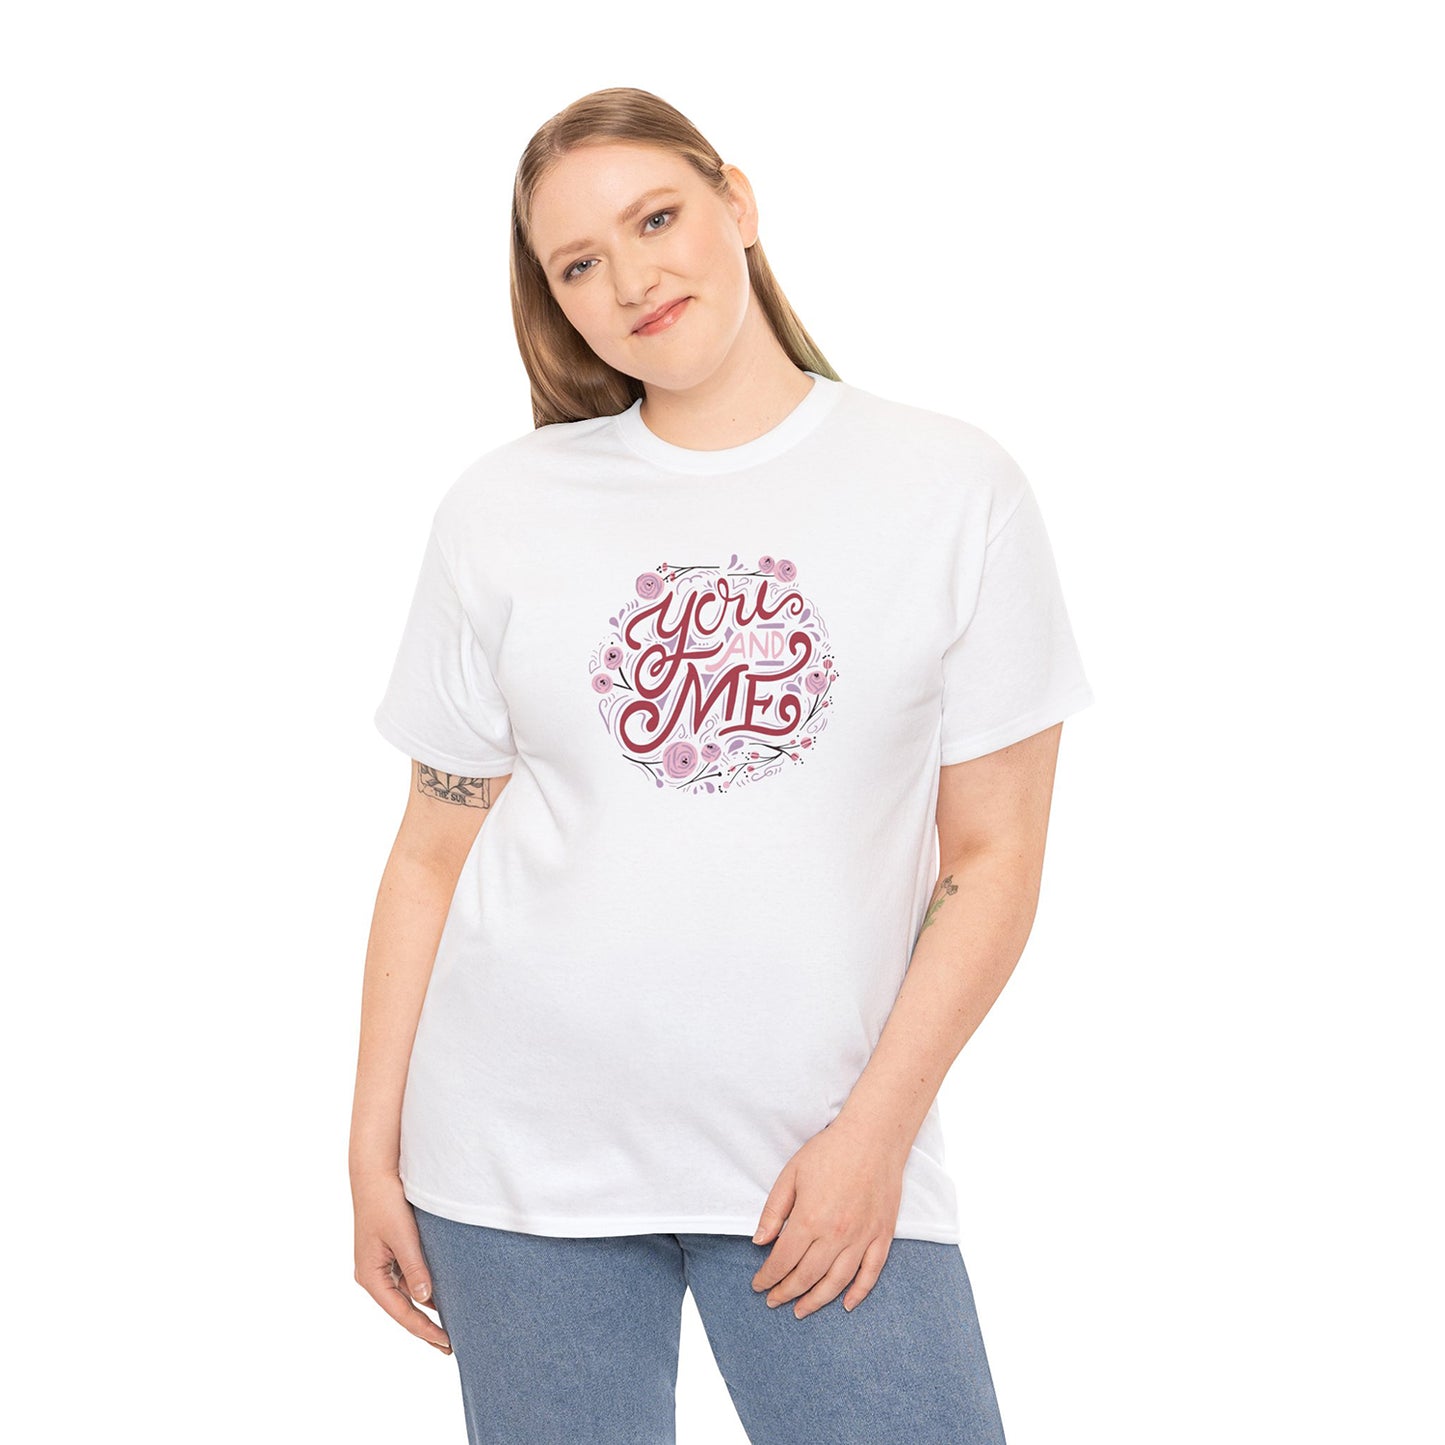 Love Express Bright Comfy Tee